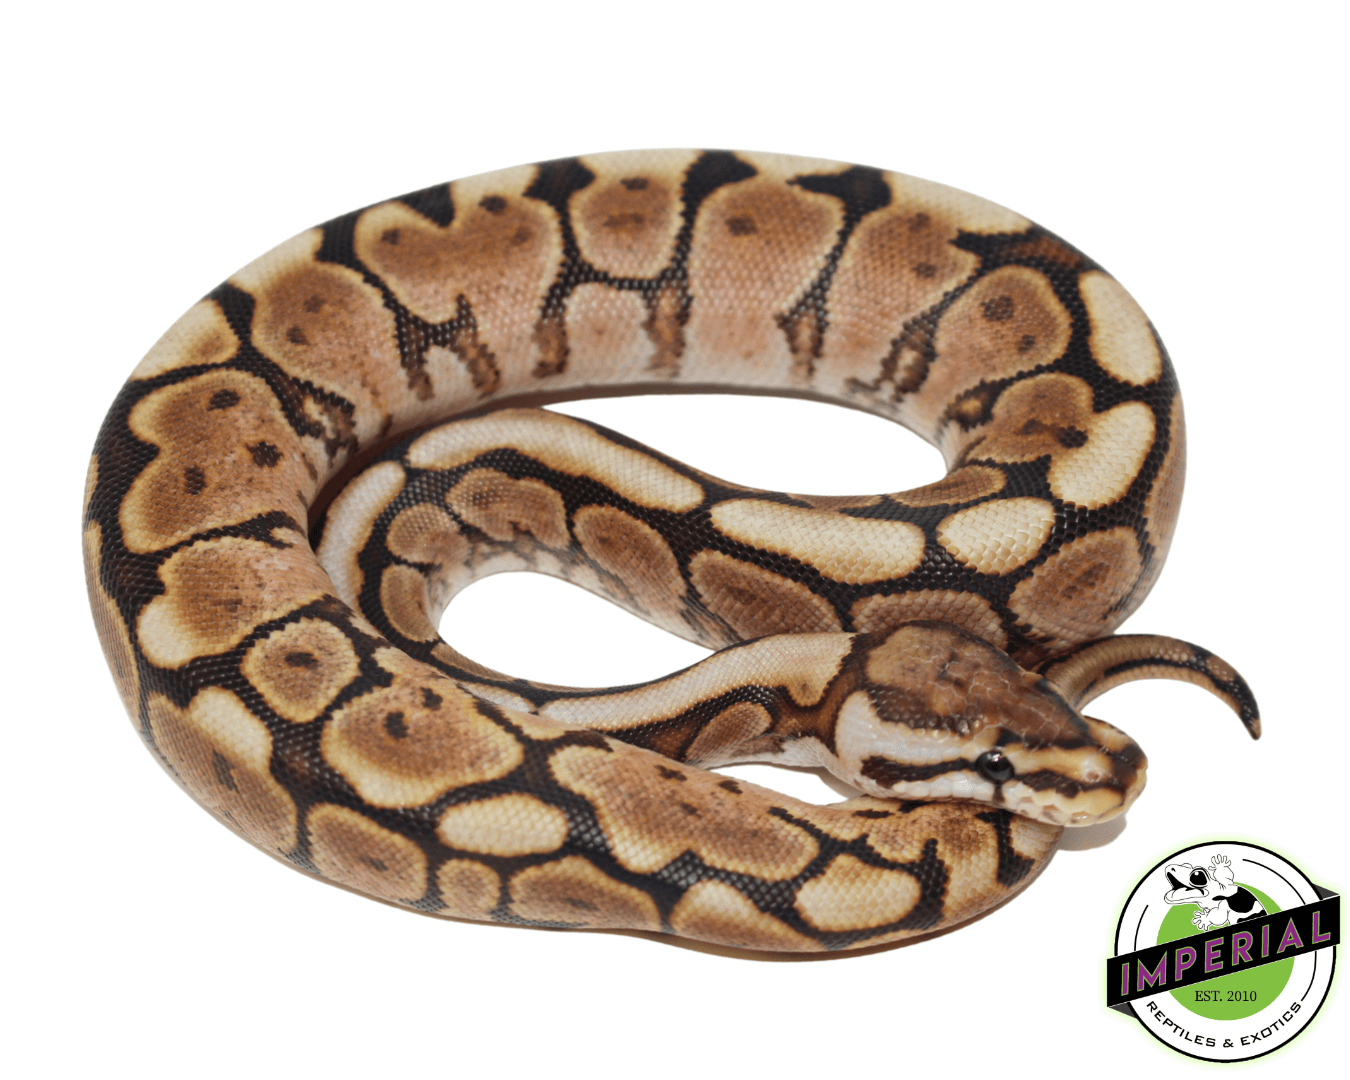 Cinnabee Yellowbelly ball python for sale, buy reptiles online